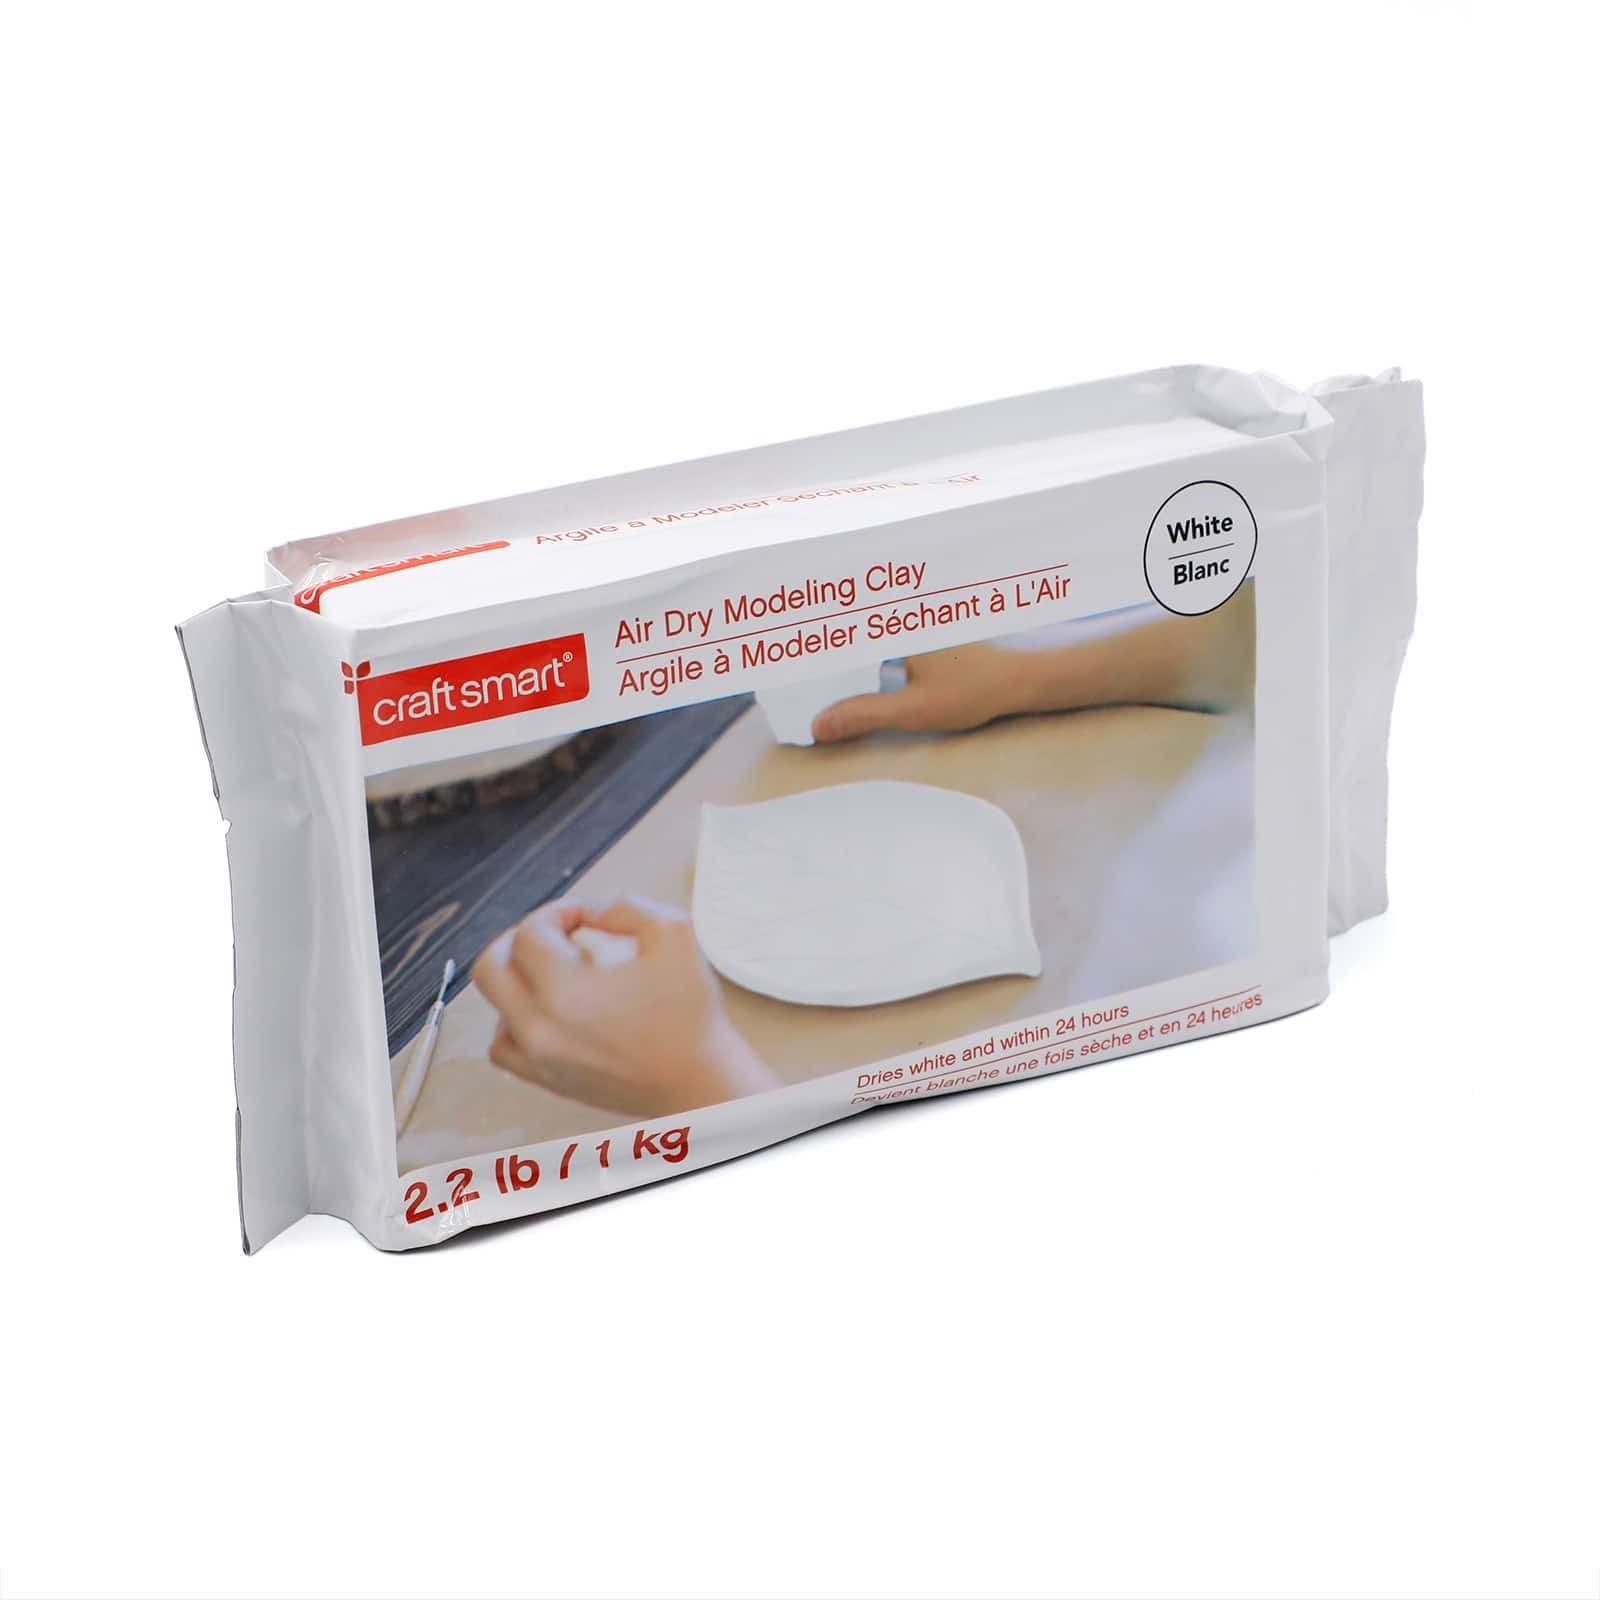 2.2lb. Air Dry Modeling Clay by Craft Smart